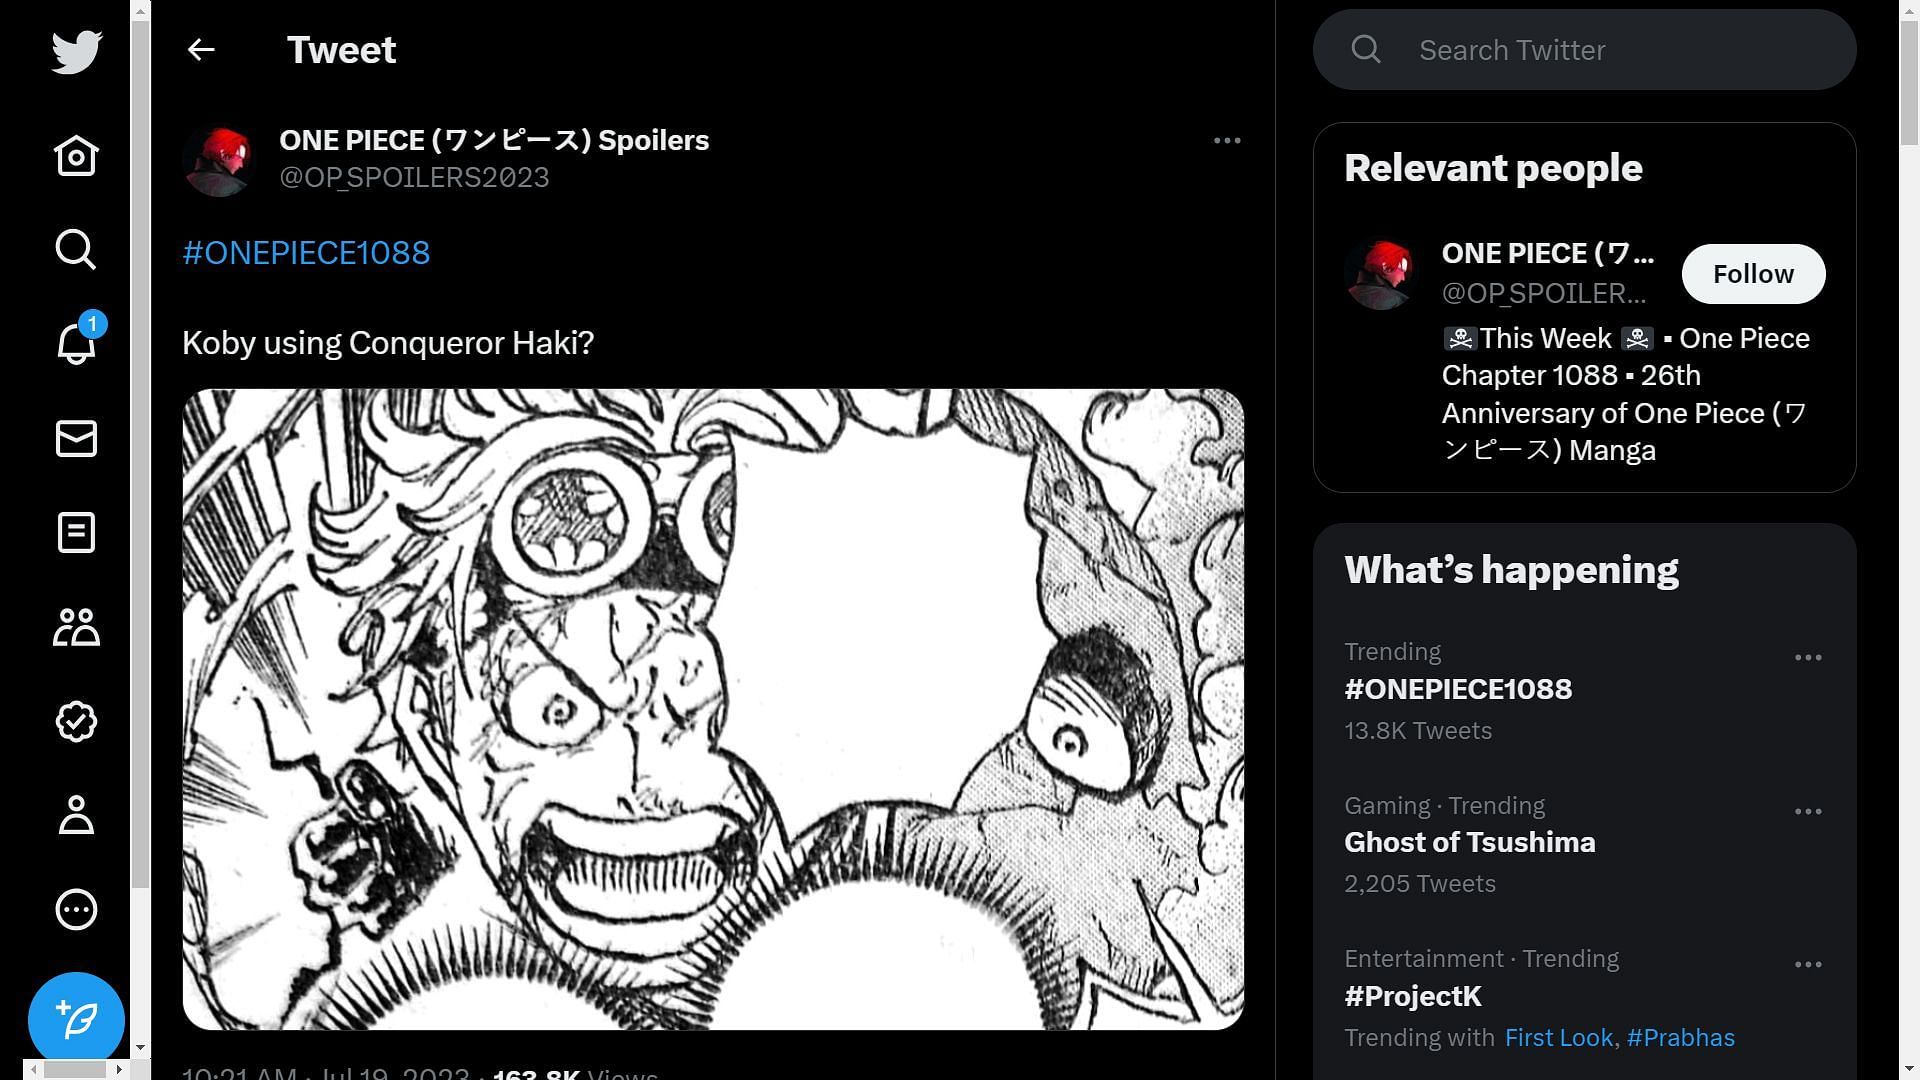 Twitter handle @OP_SPOILERS2023 speculates the possibility of Koby having Conqueror&#039;s Haki (Image Twitter/@OP_SPOILERS2023)